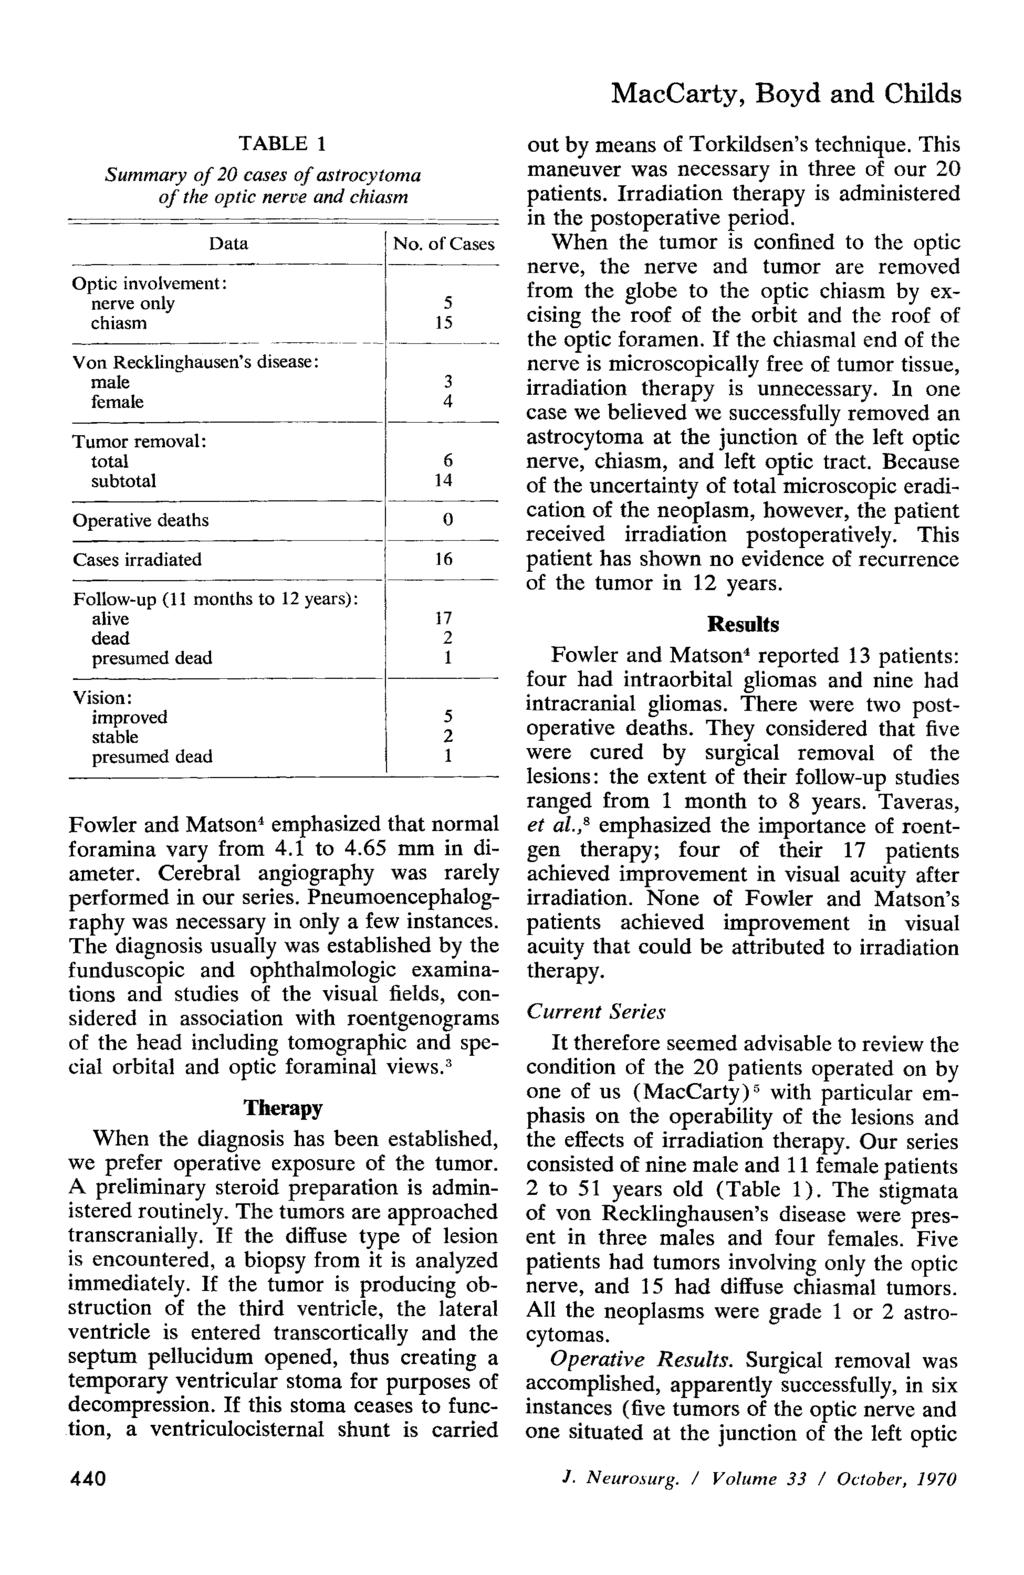 MacCarty, Boyd and Childs TABLE 1 Summary of 20 cases of astrocytoma of the optic nerve and chiasm Data Optic involvement: nerve only chiasm Von Recklinghausen's disease: male female No.